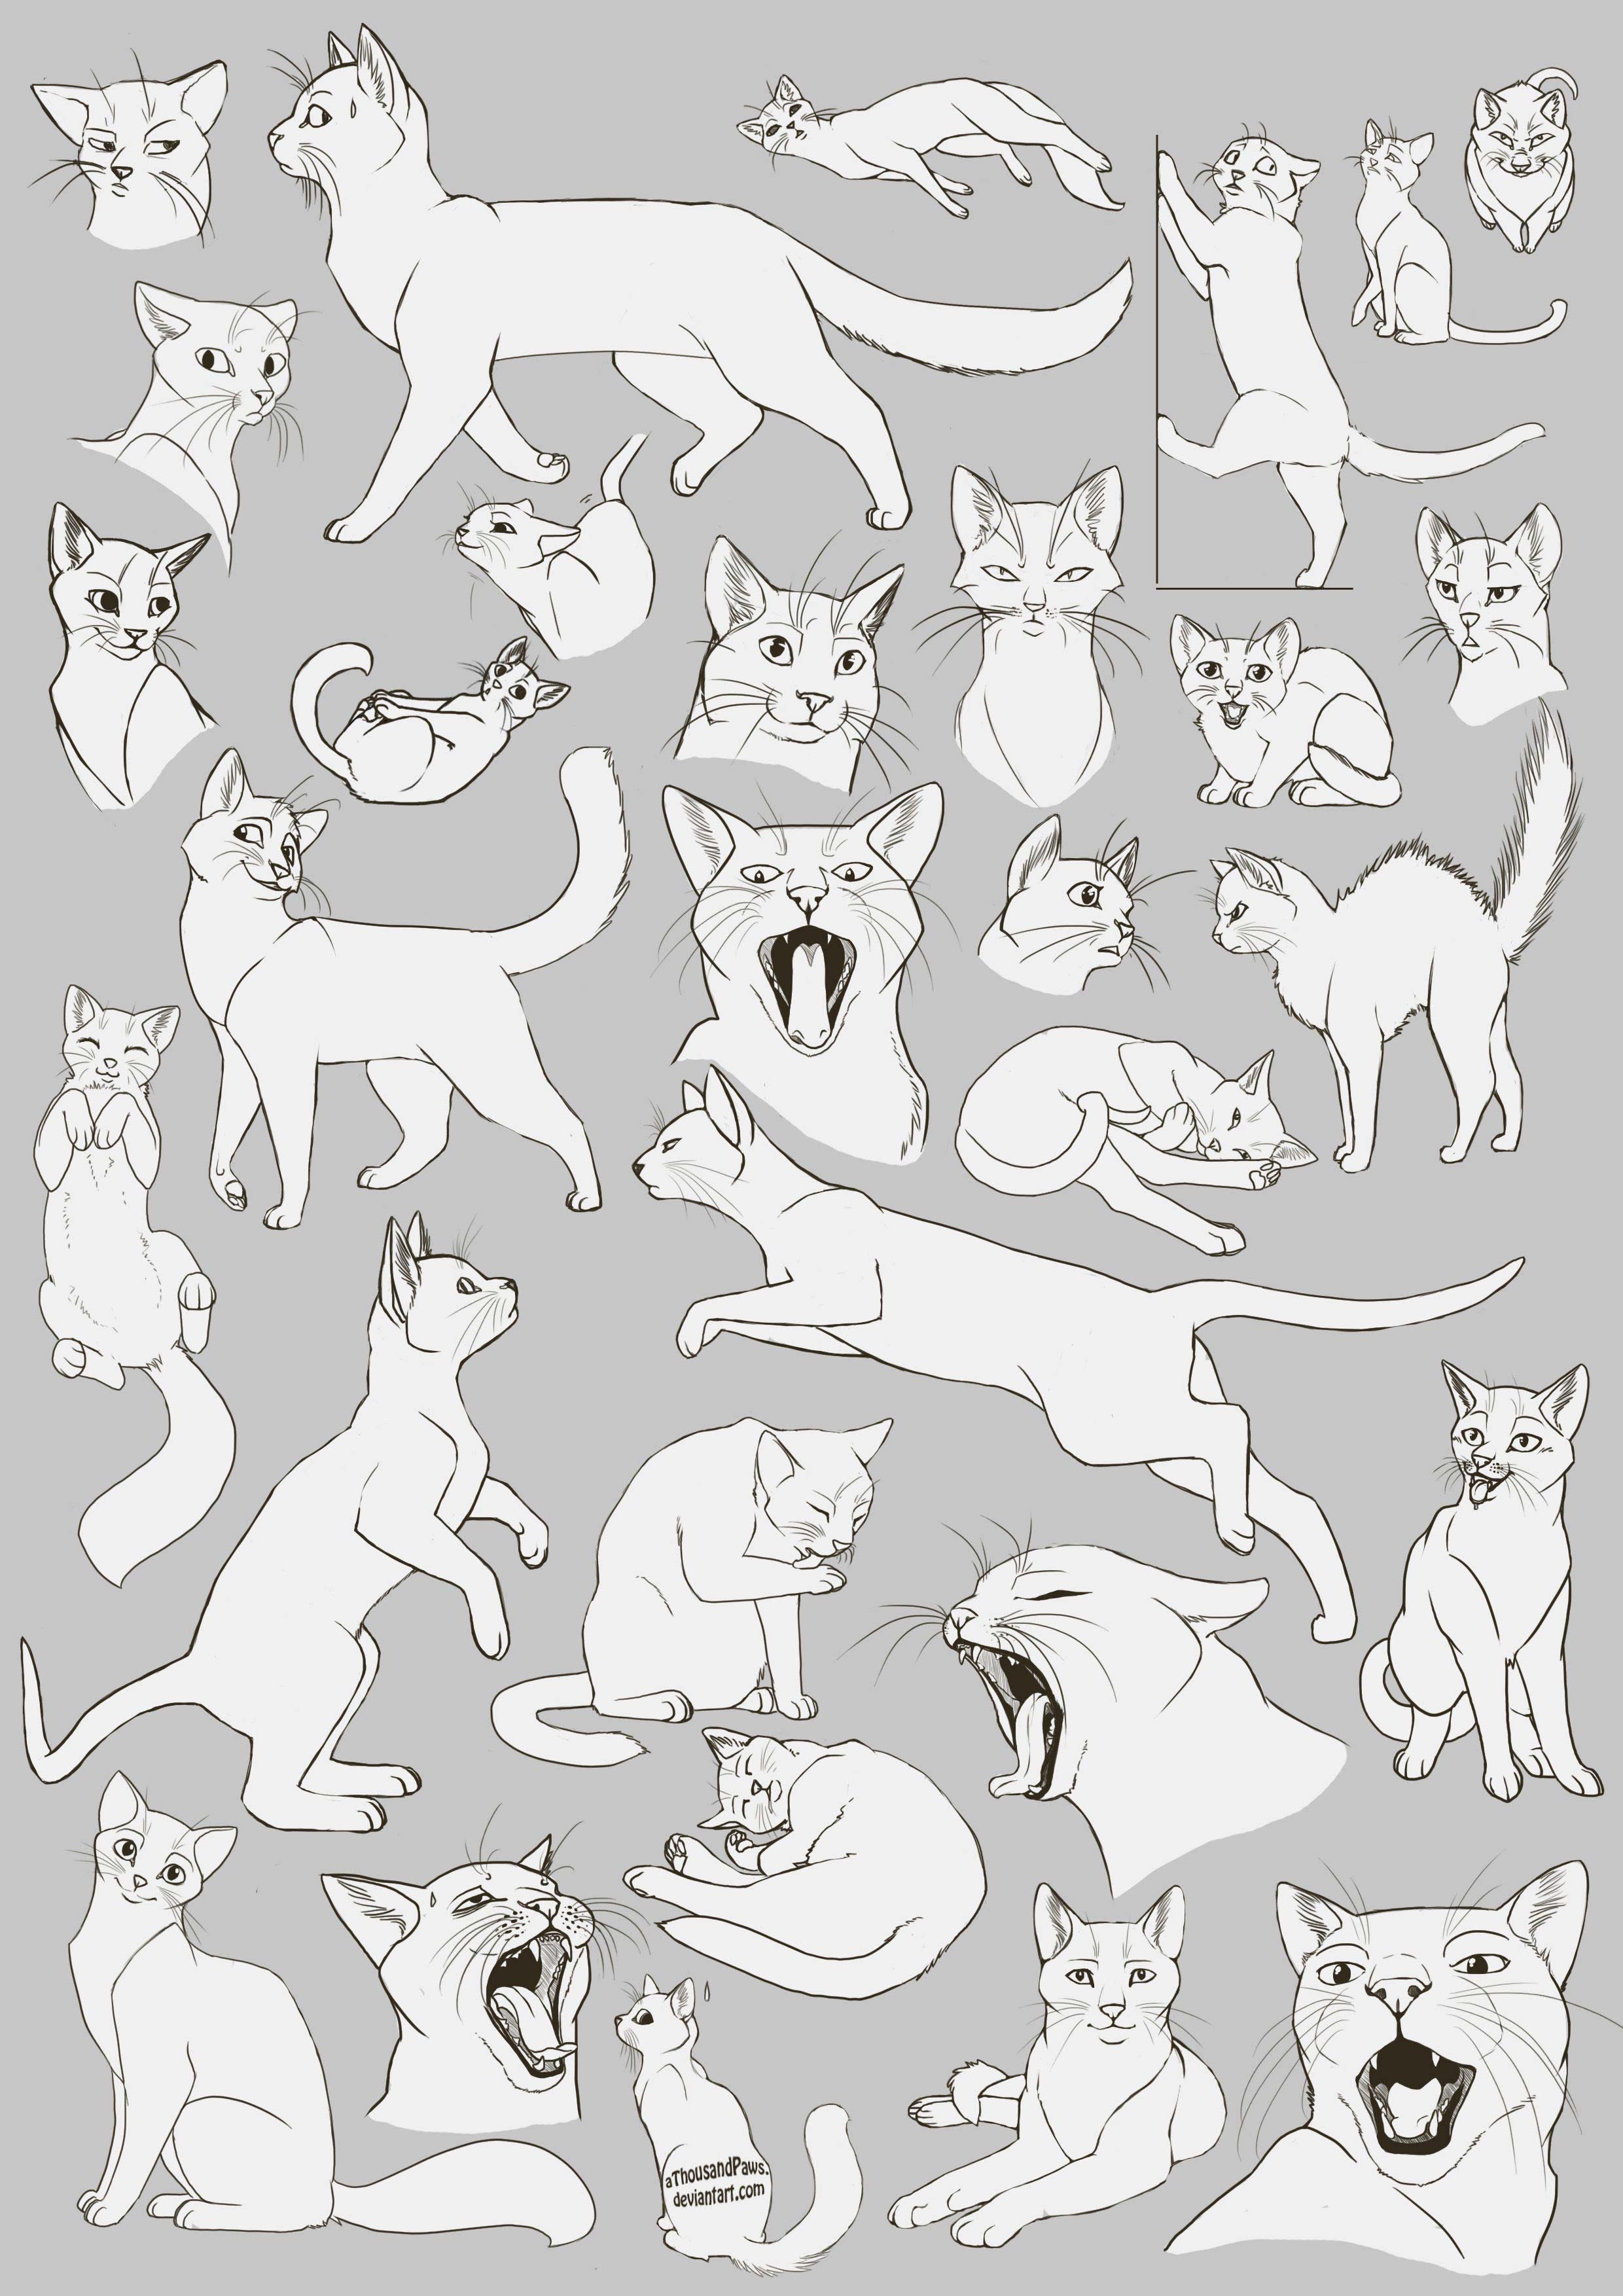 Cat Drawing Reference and Sketches for Artists.